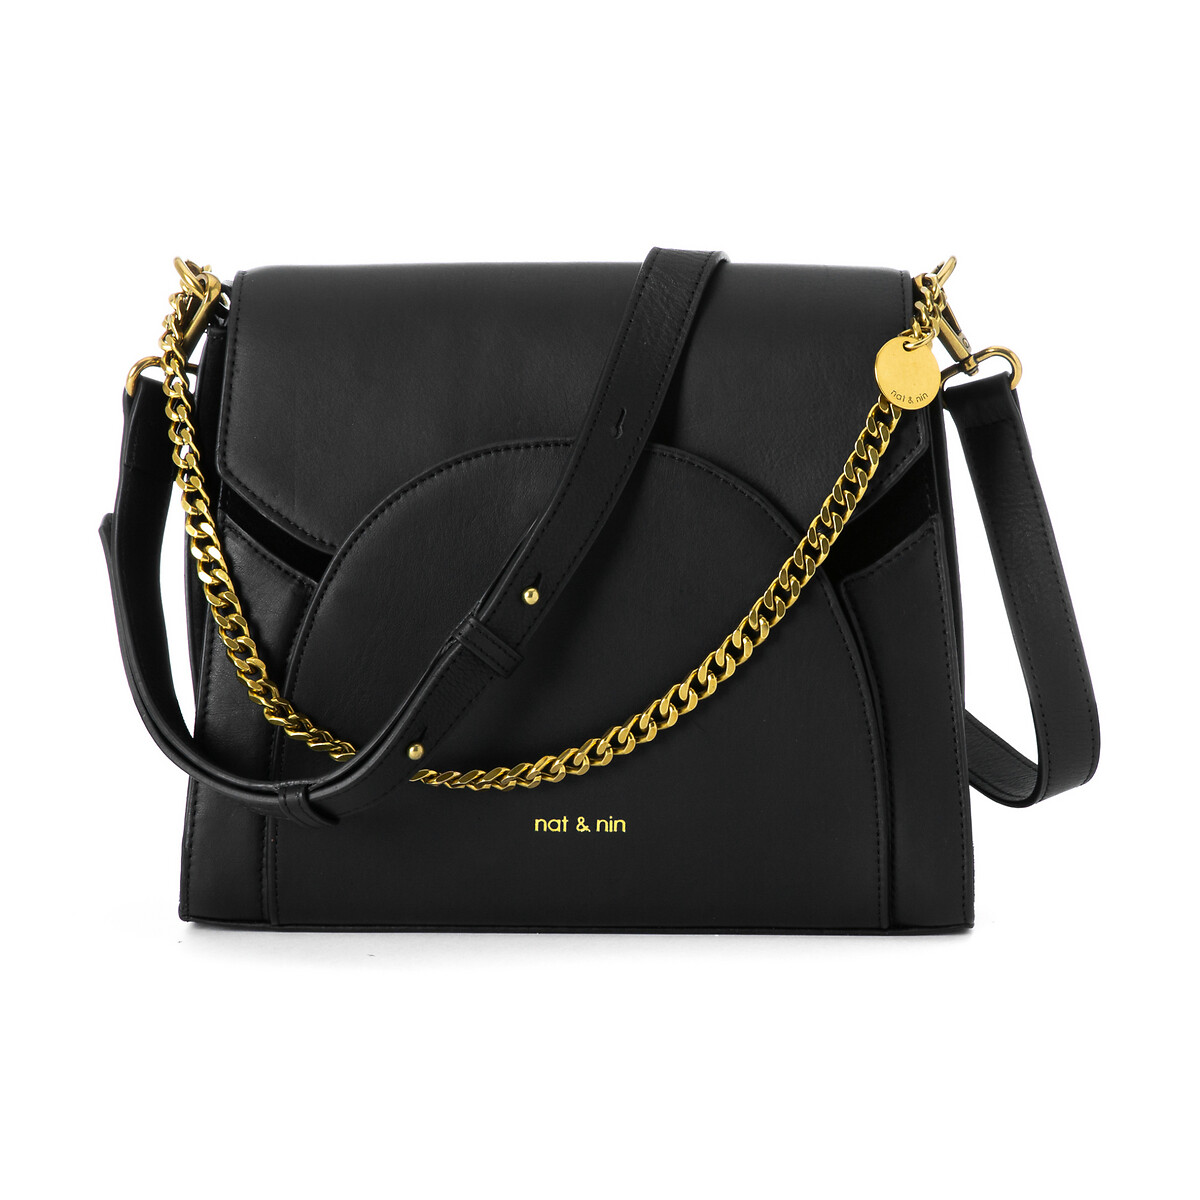 Kamila leather bag with detachable gold chain shoulder/crossbody strap ...